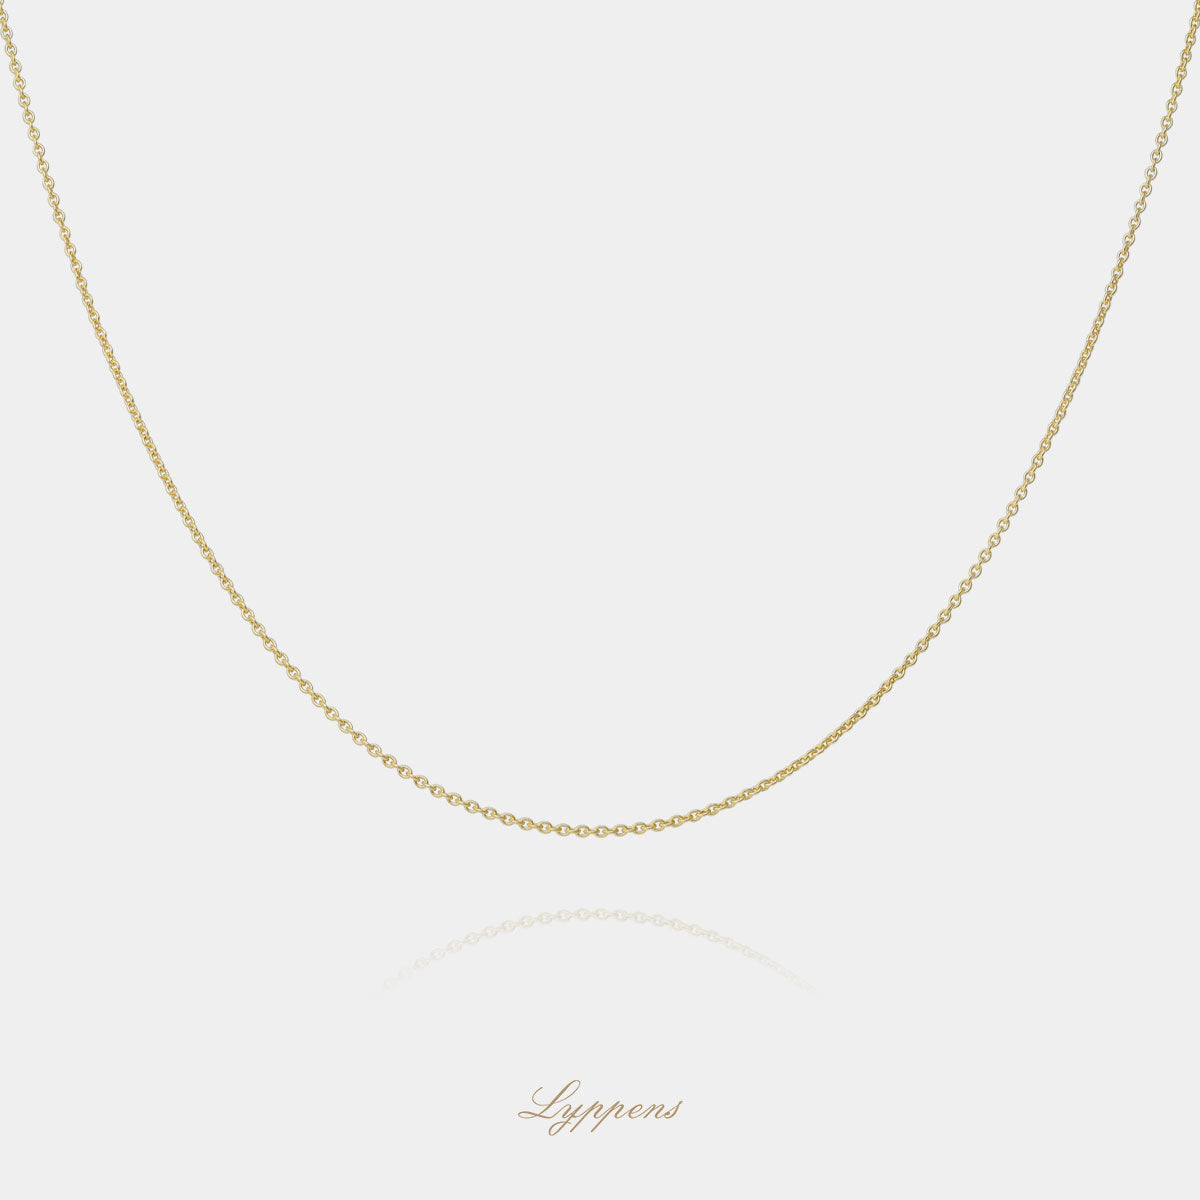 Yellow gold anchor link necklace